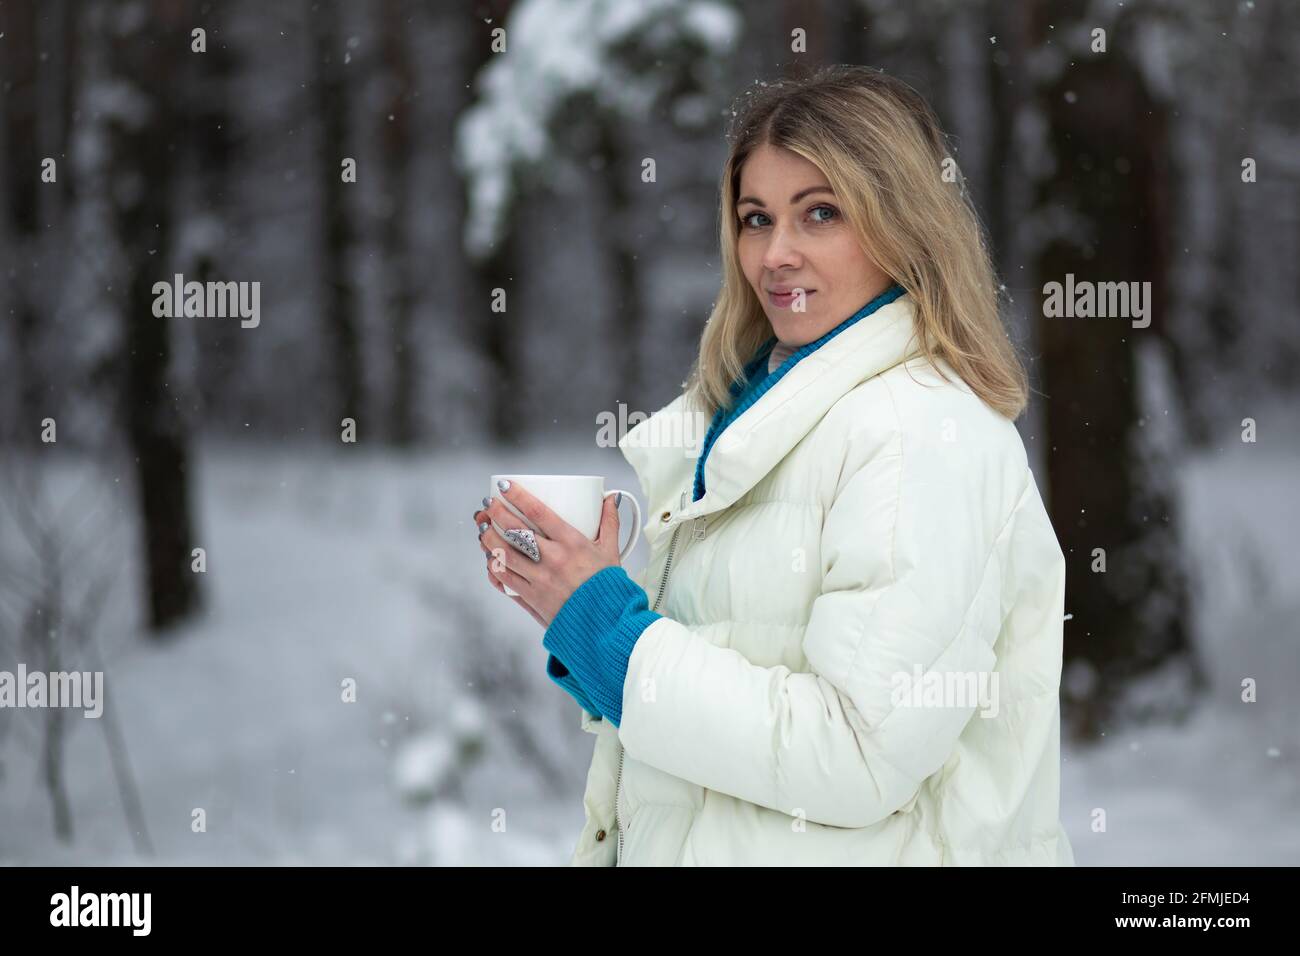 https://c8.alamy.com/comp/2FMJED4/young-blond-female-holding-in-her-hands-a-white-cup-in-a-winter-day-with-a-white-snow-on-a-background-2FMJED4.jpg